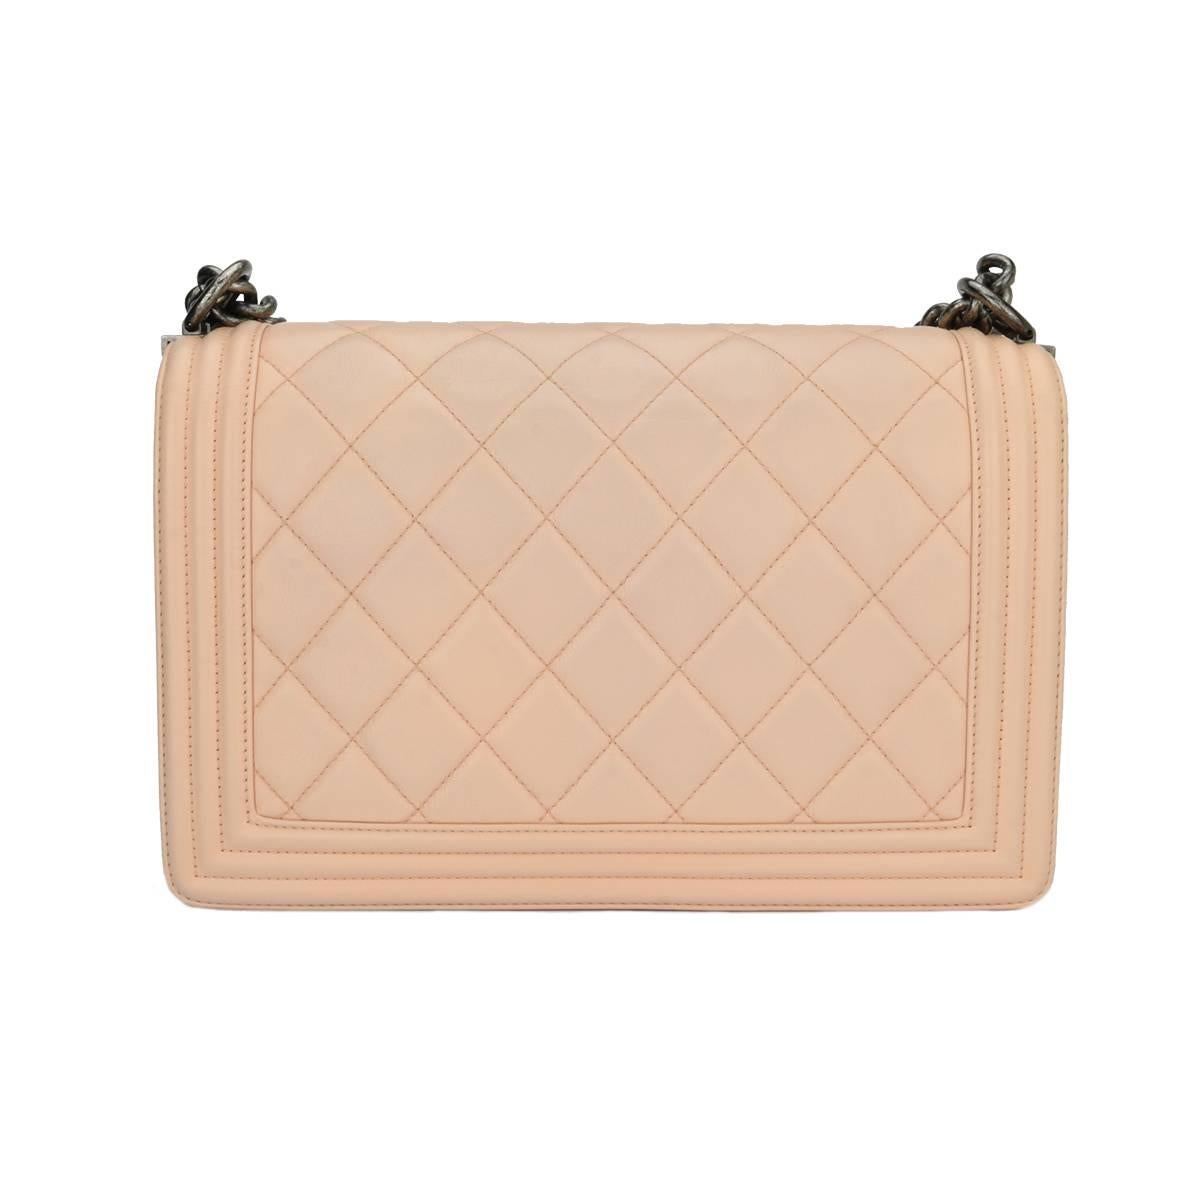 Authentic CHANEL New Medium Large Quilt Boy Pink Calfskin with Ruthenium Hardware 2015.

This stunning bag is still in an excellent condition; it still keeps its original shape well and the hardware still very shiny.

Exterior Condition: Excellent